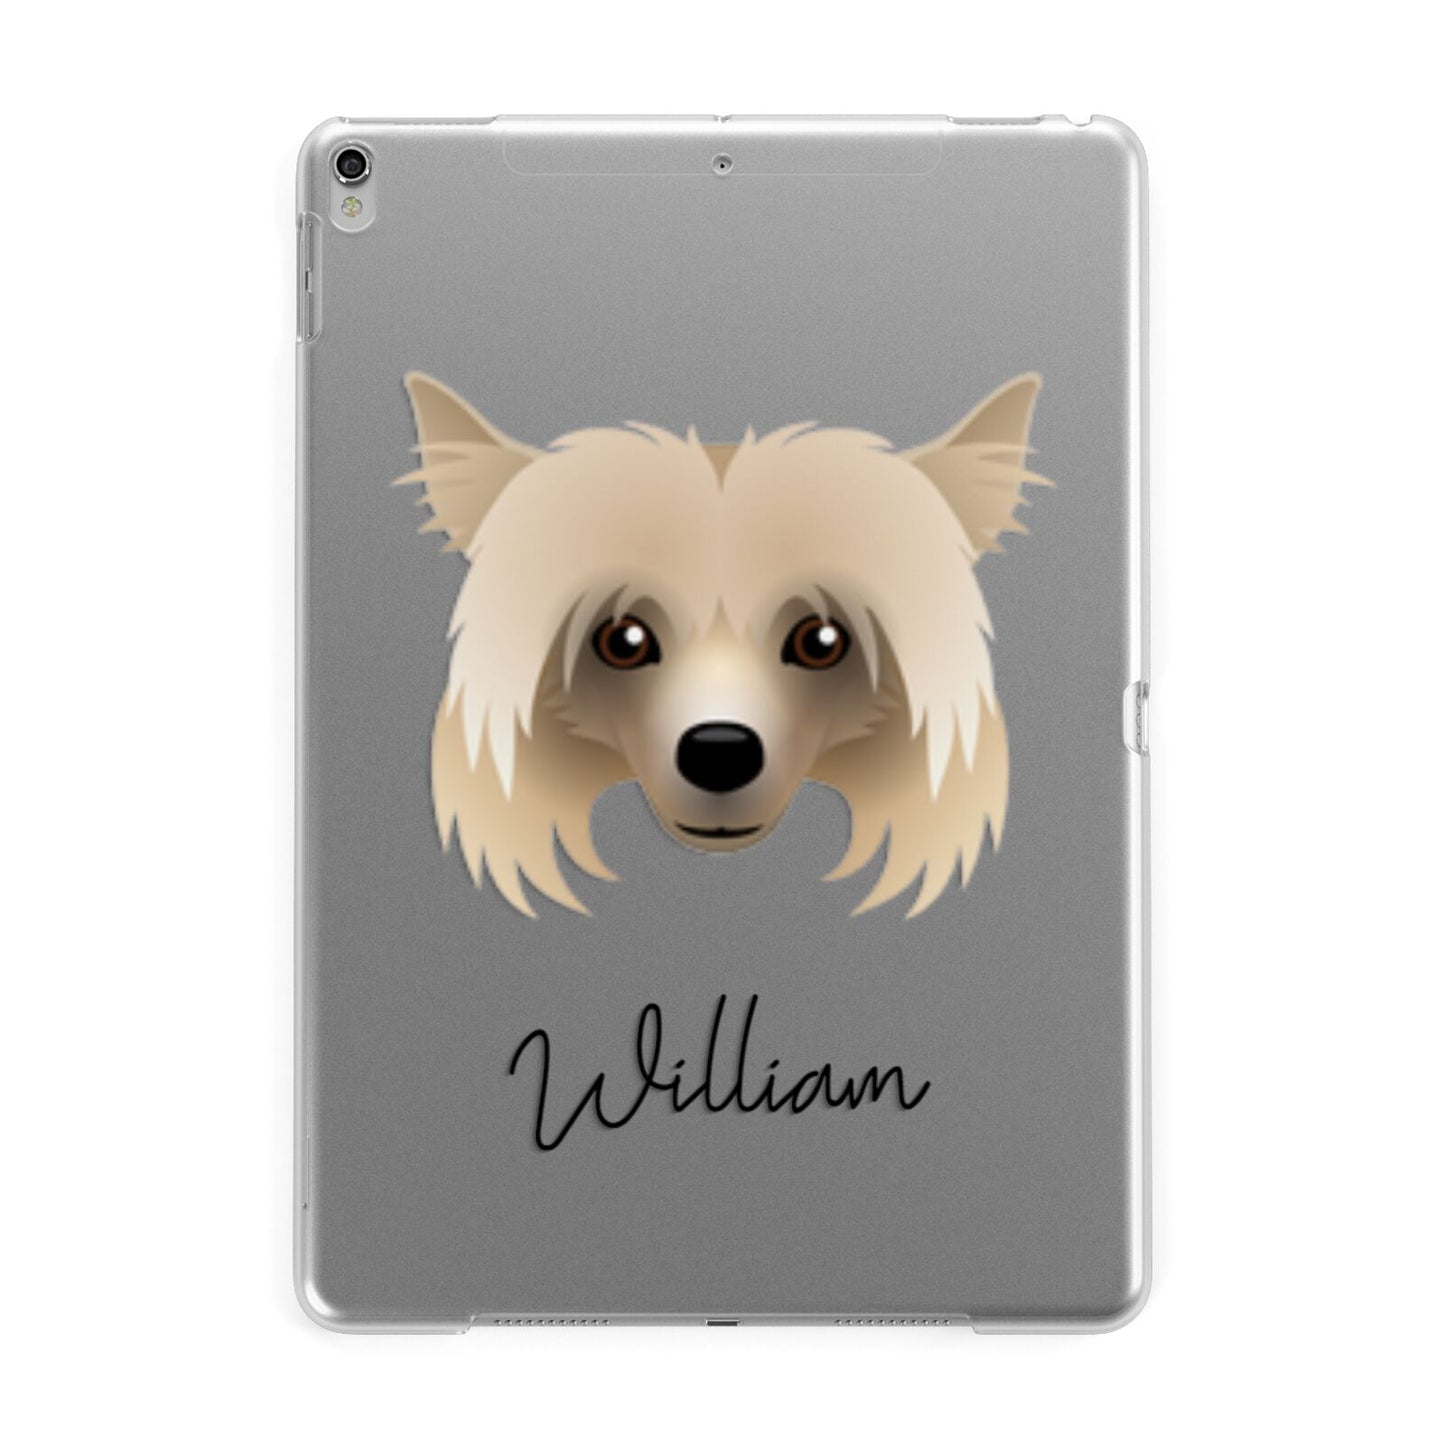 Powderpuff Chinese Crested Personalised Apple iPad Silver Case